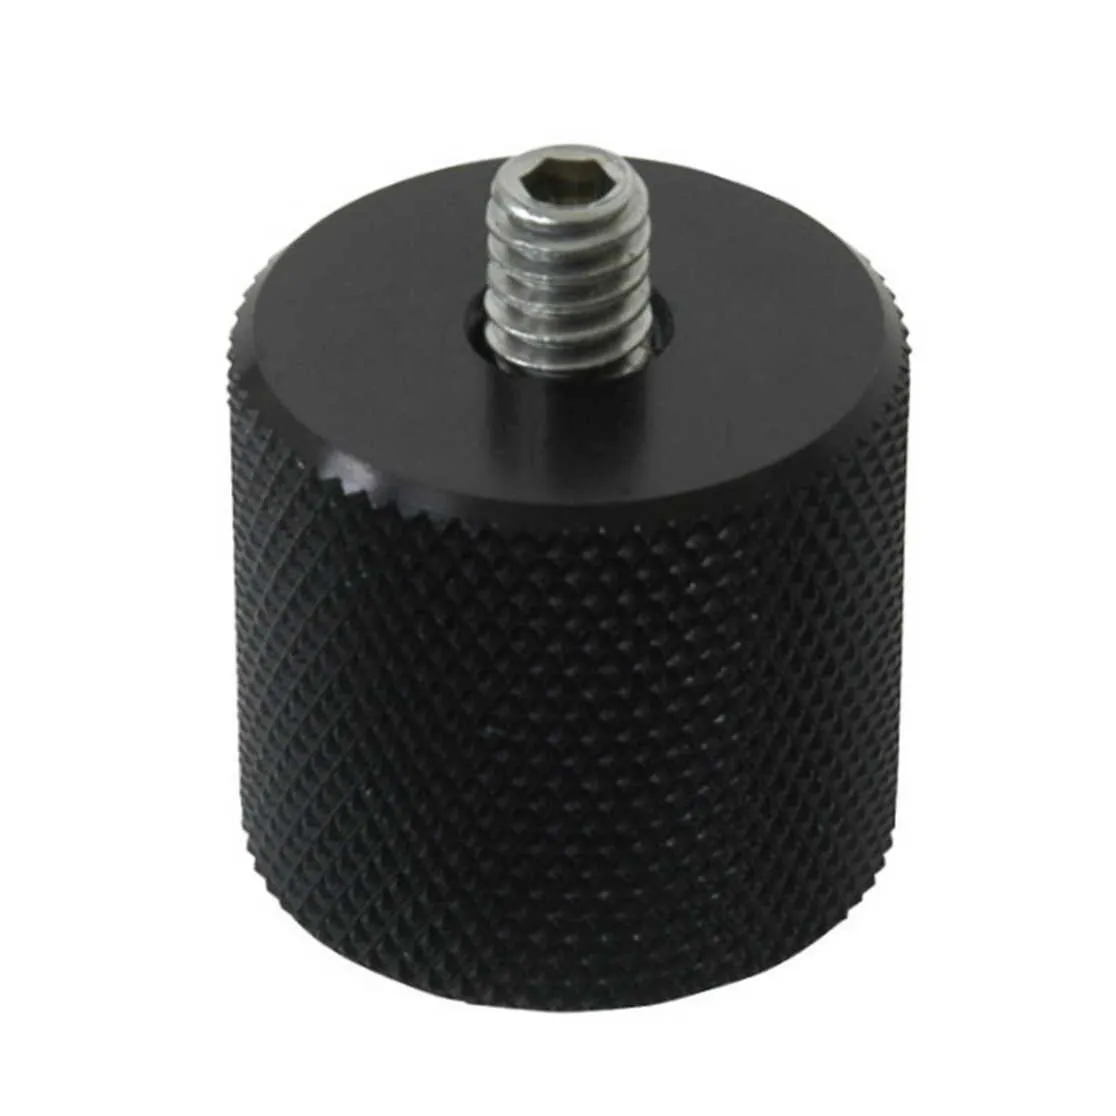 SECO 5/8" Female to 1/4" Male Thread Adapter